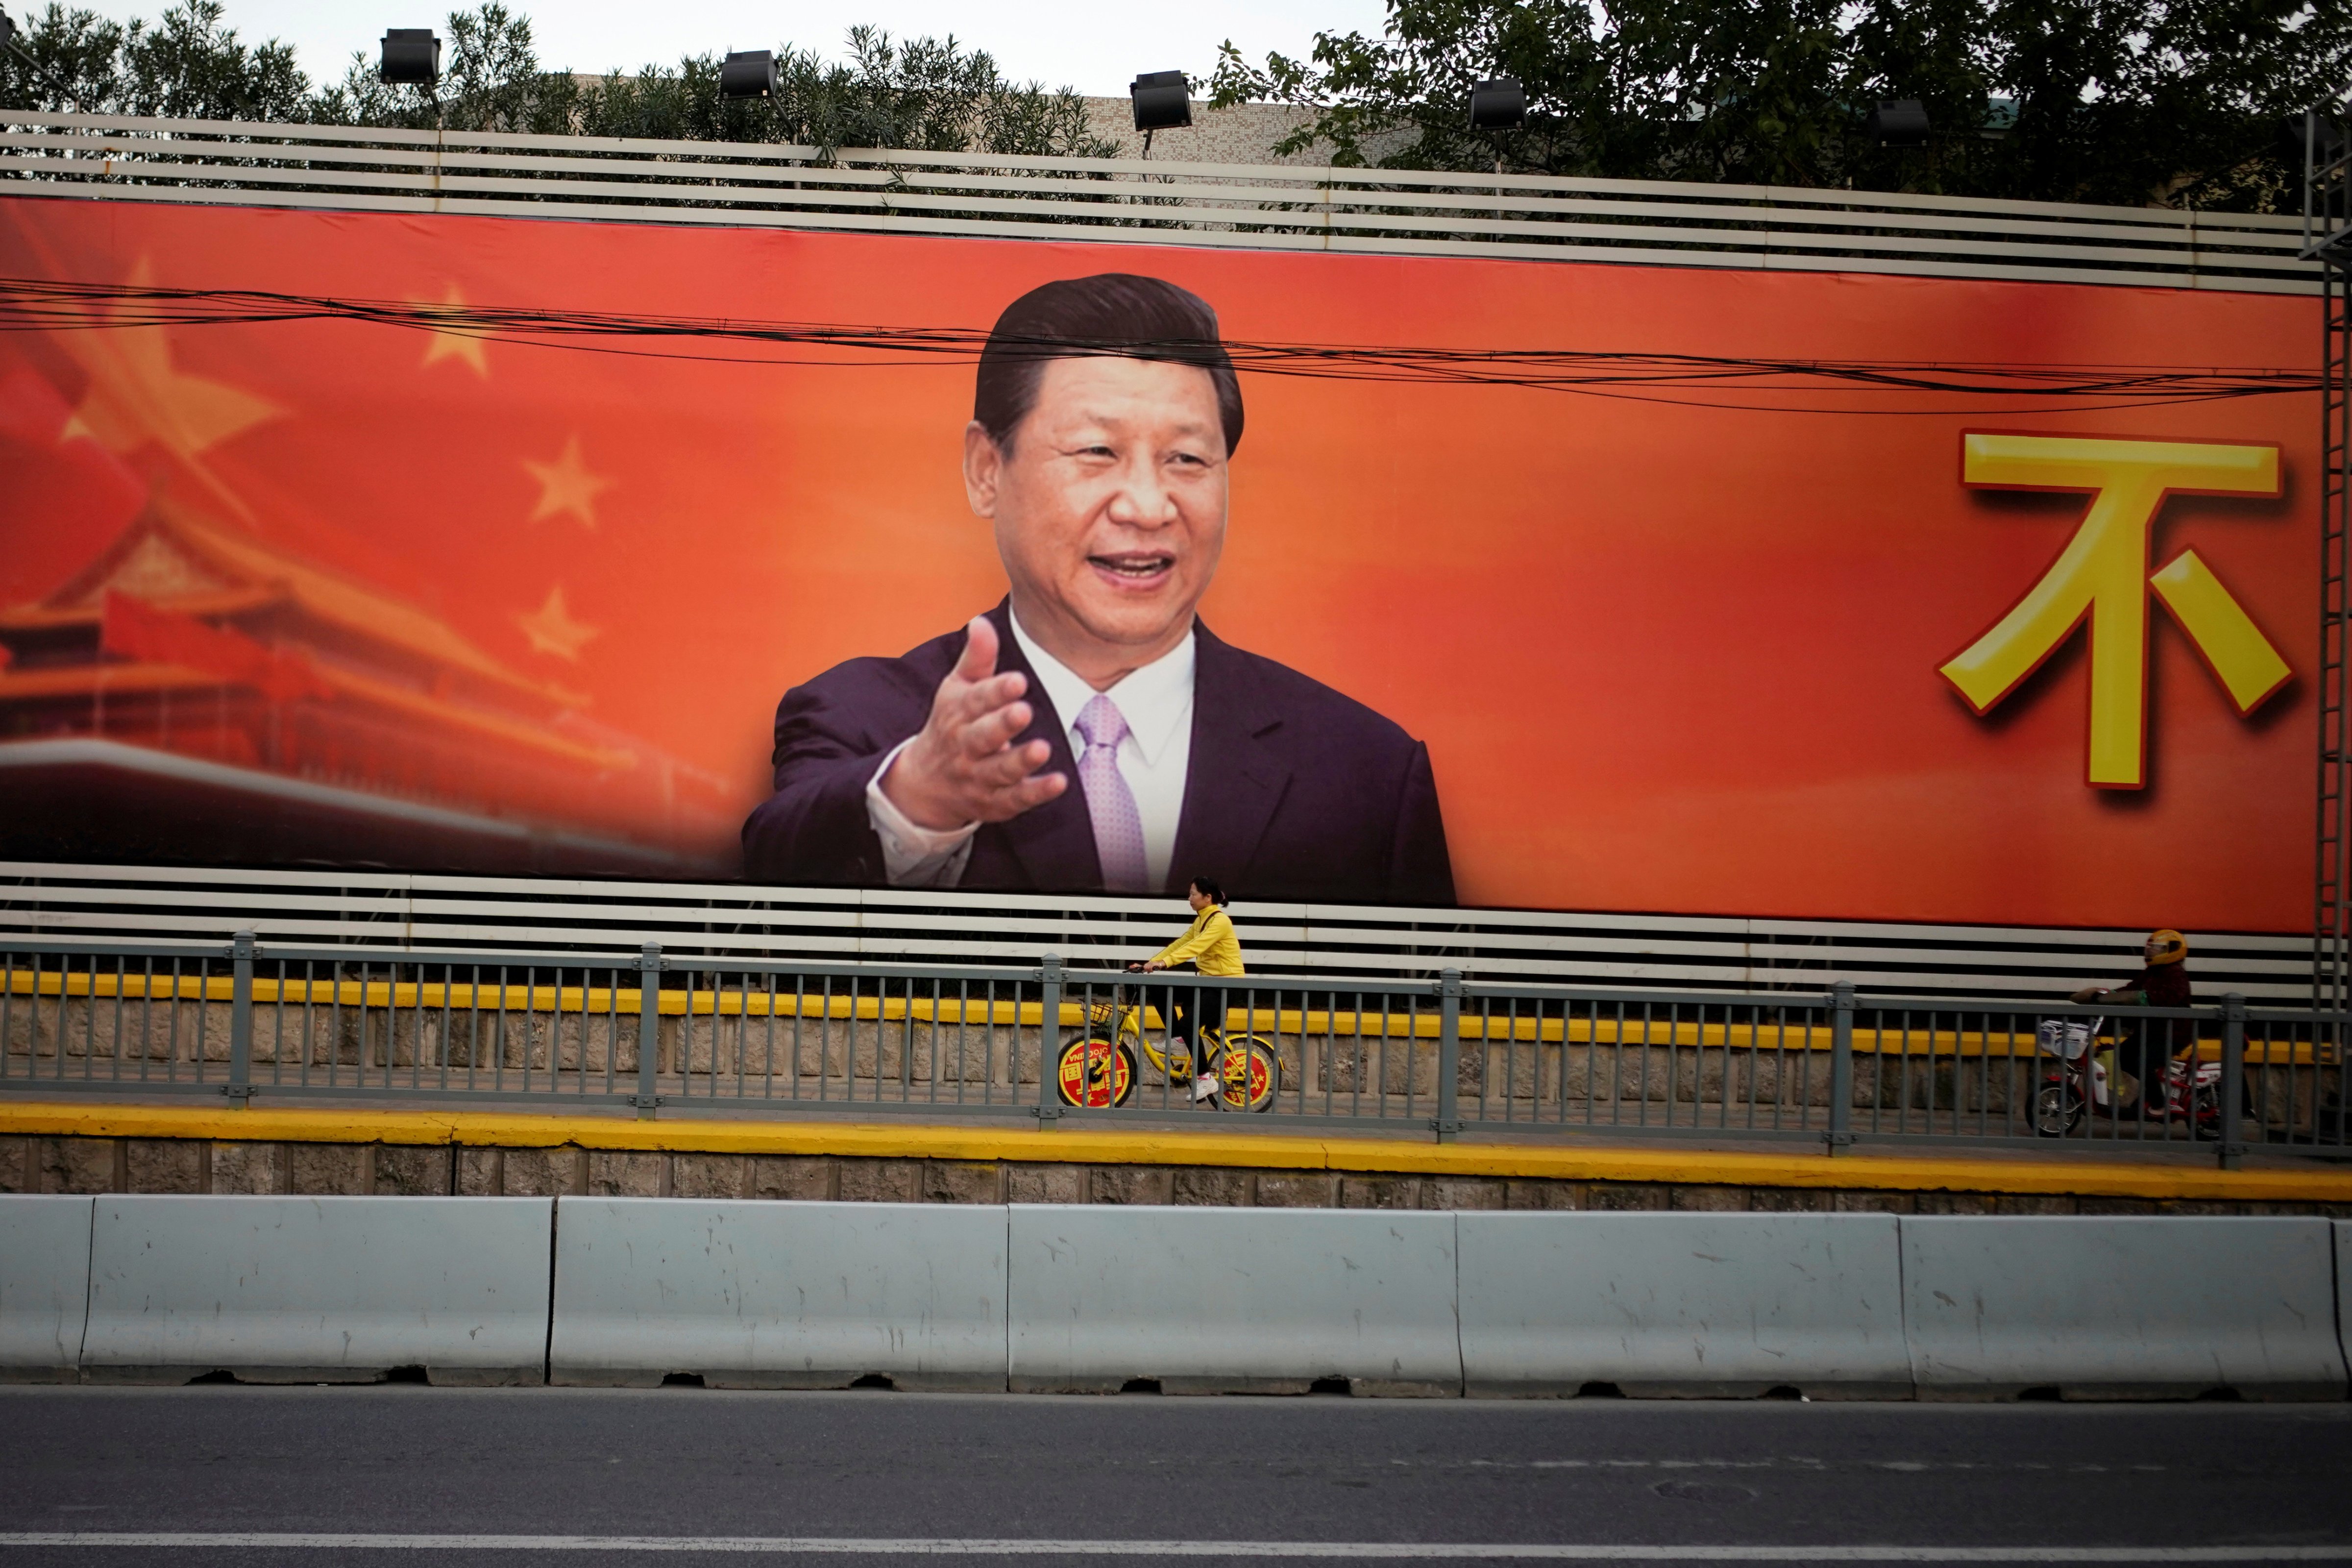 Chinese President Xi Poster Daily Life